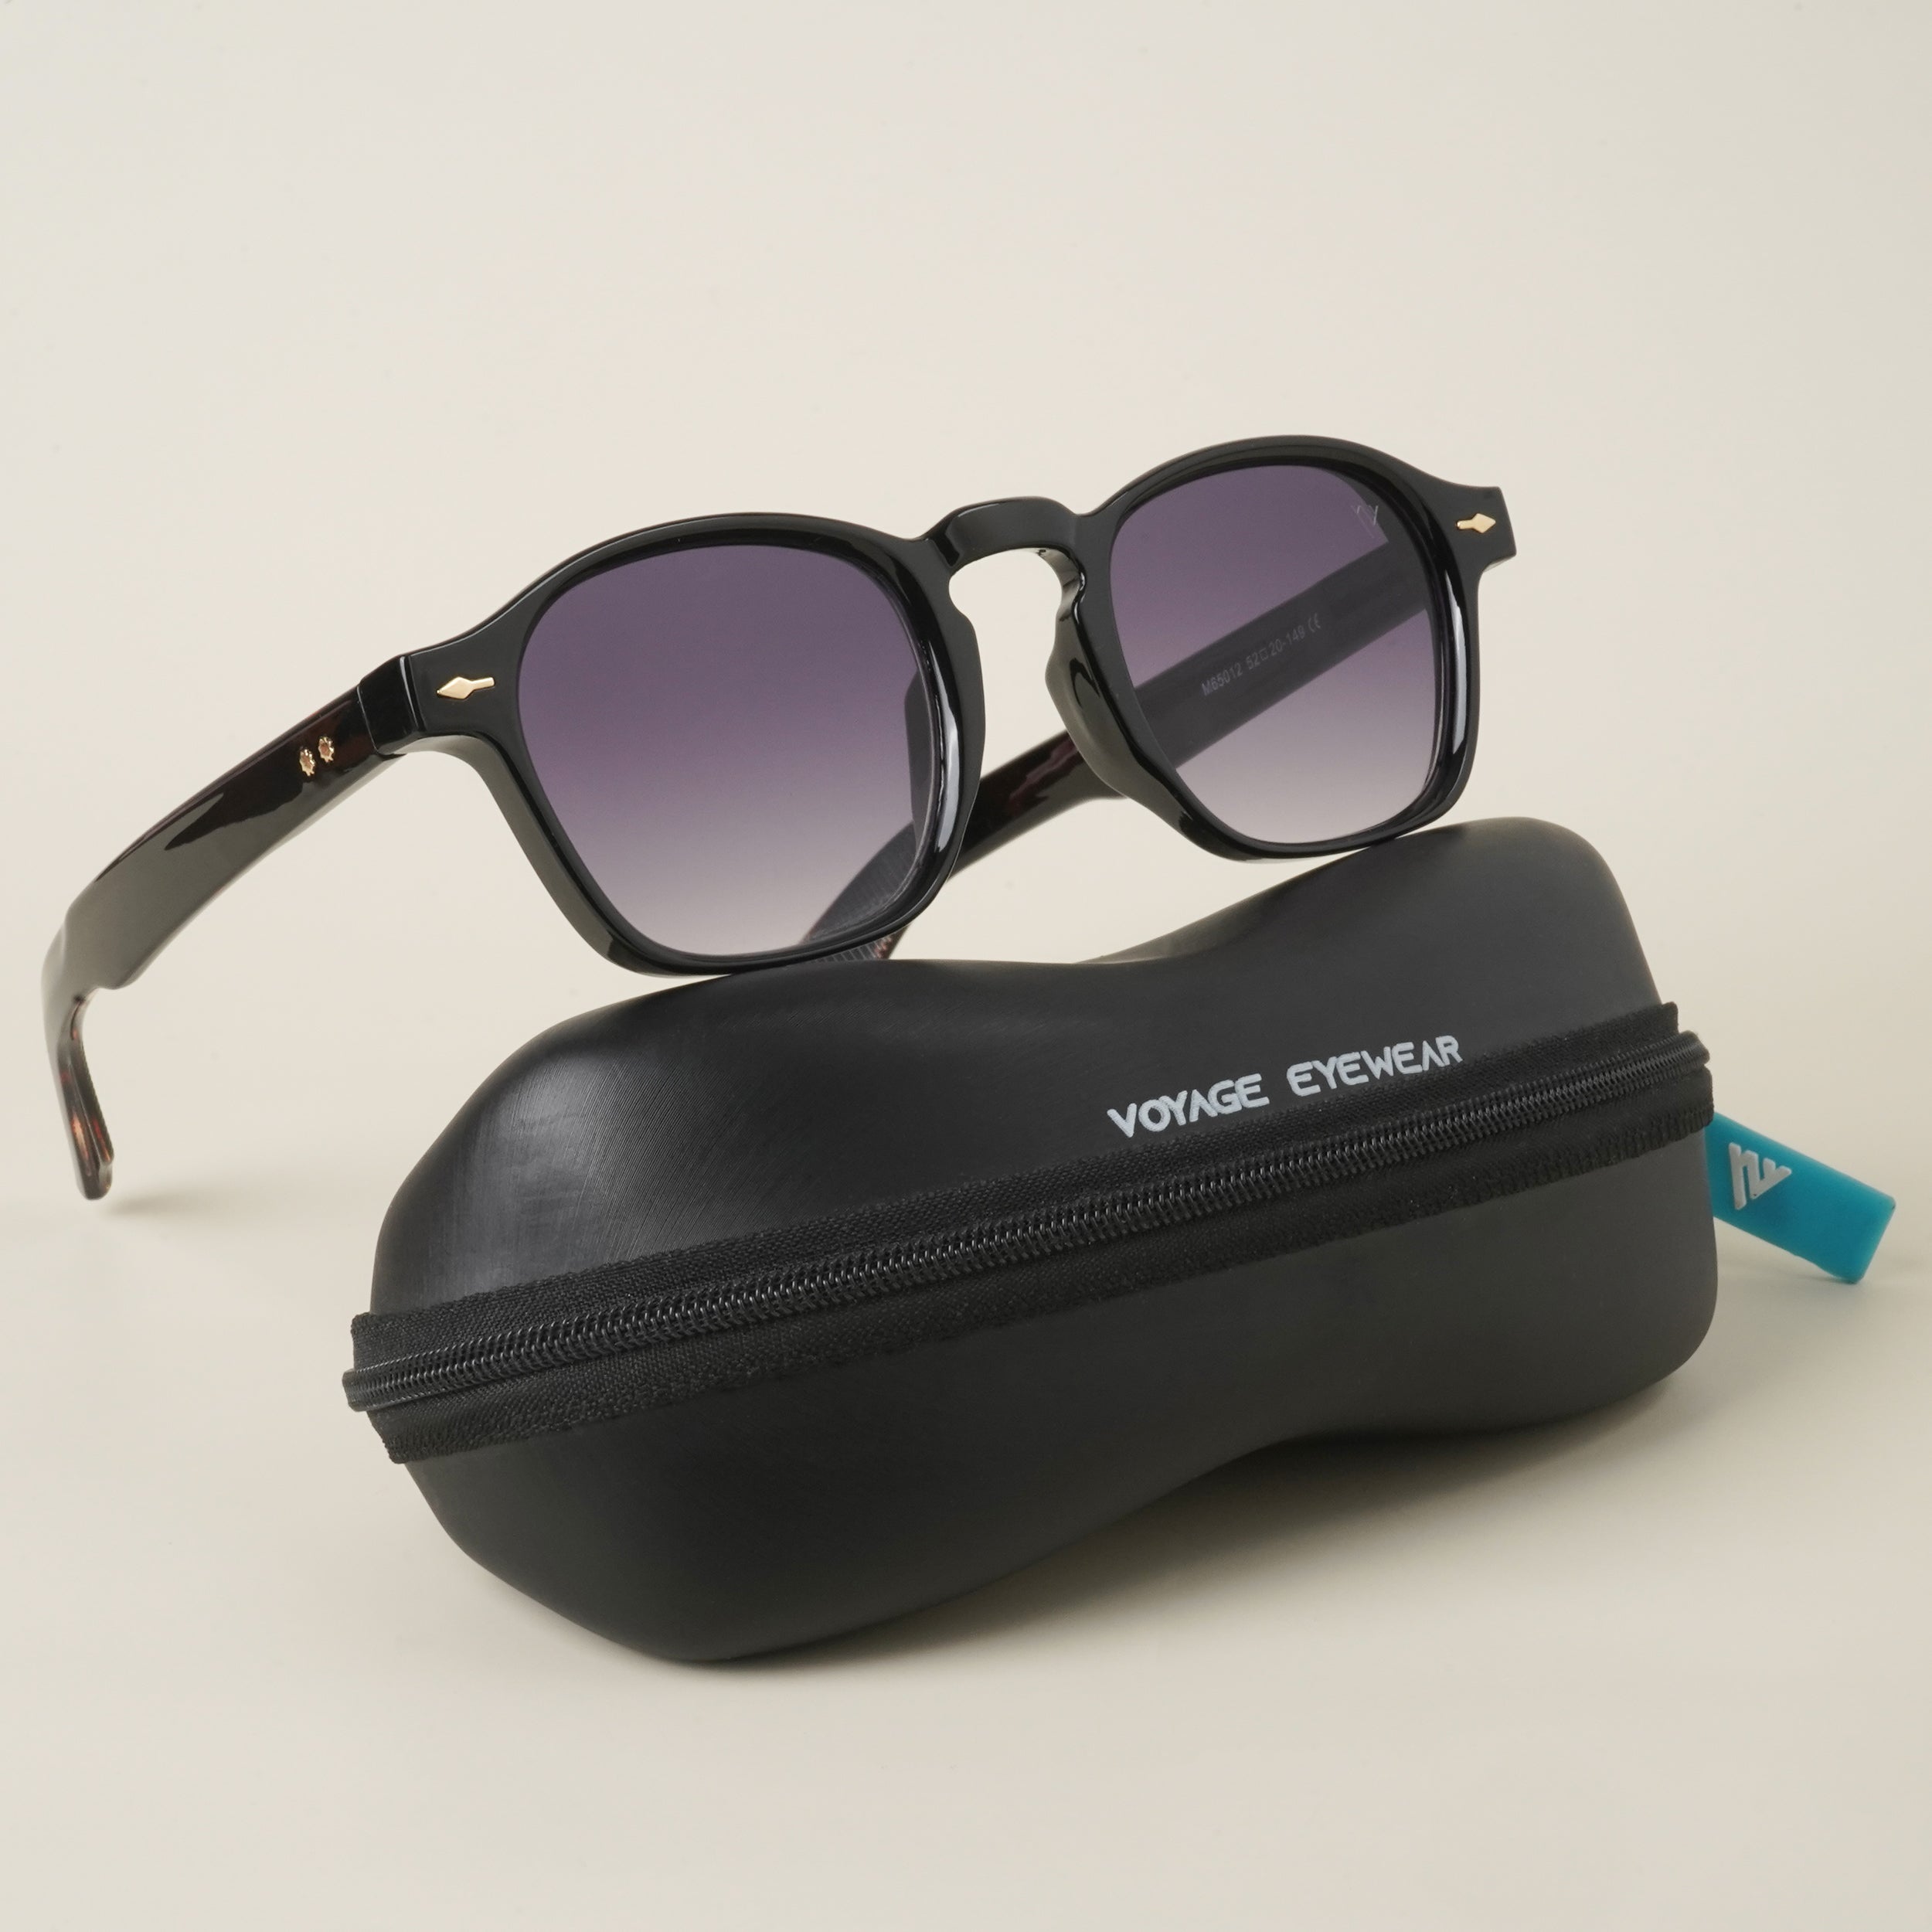 Voyage Grey & Clear Round Sunglasses - MG3809